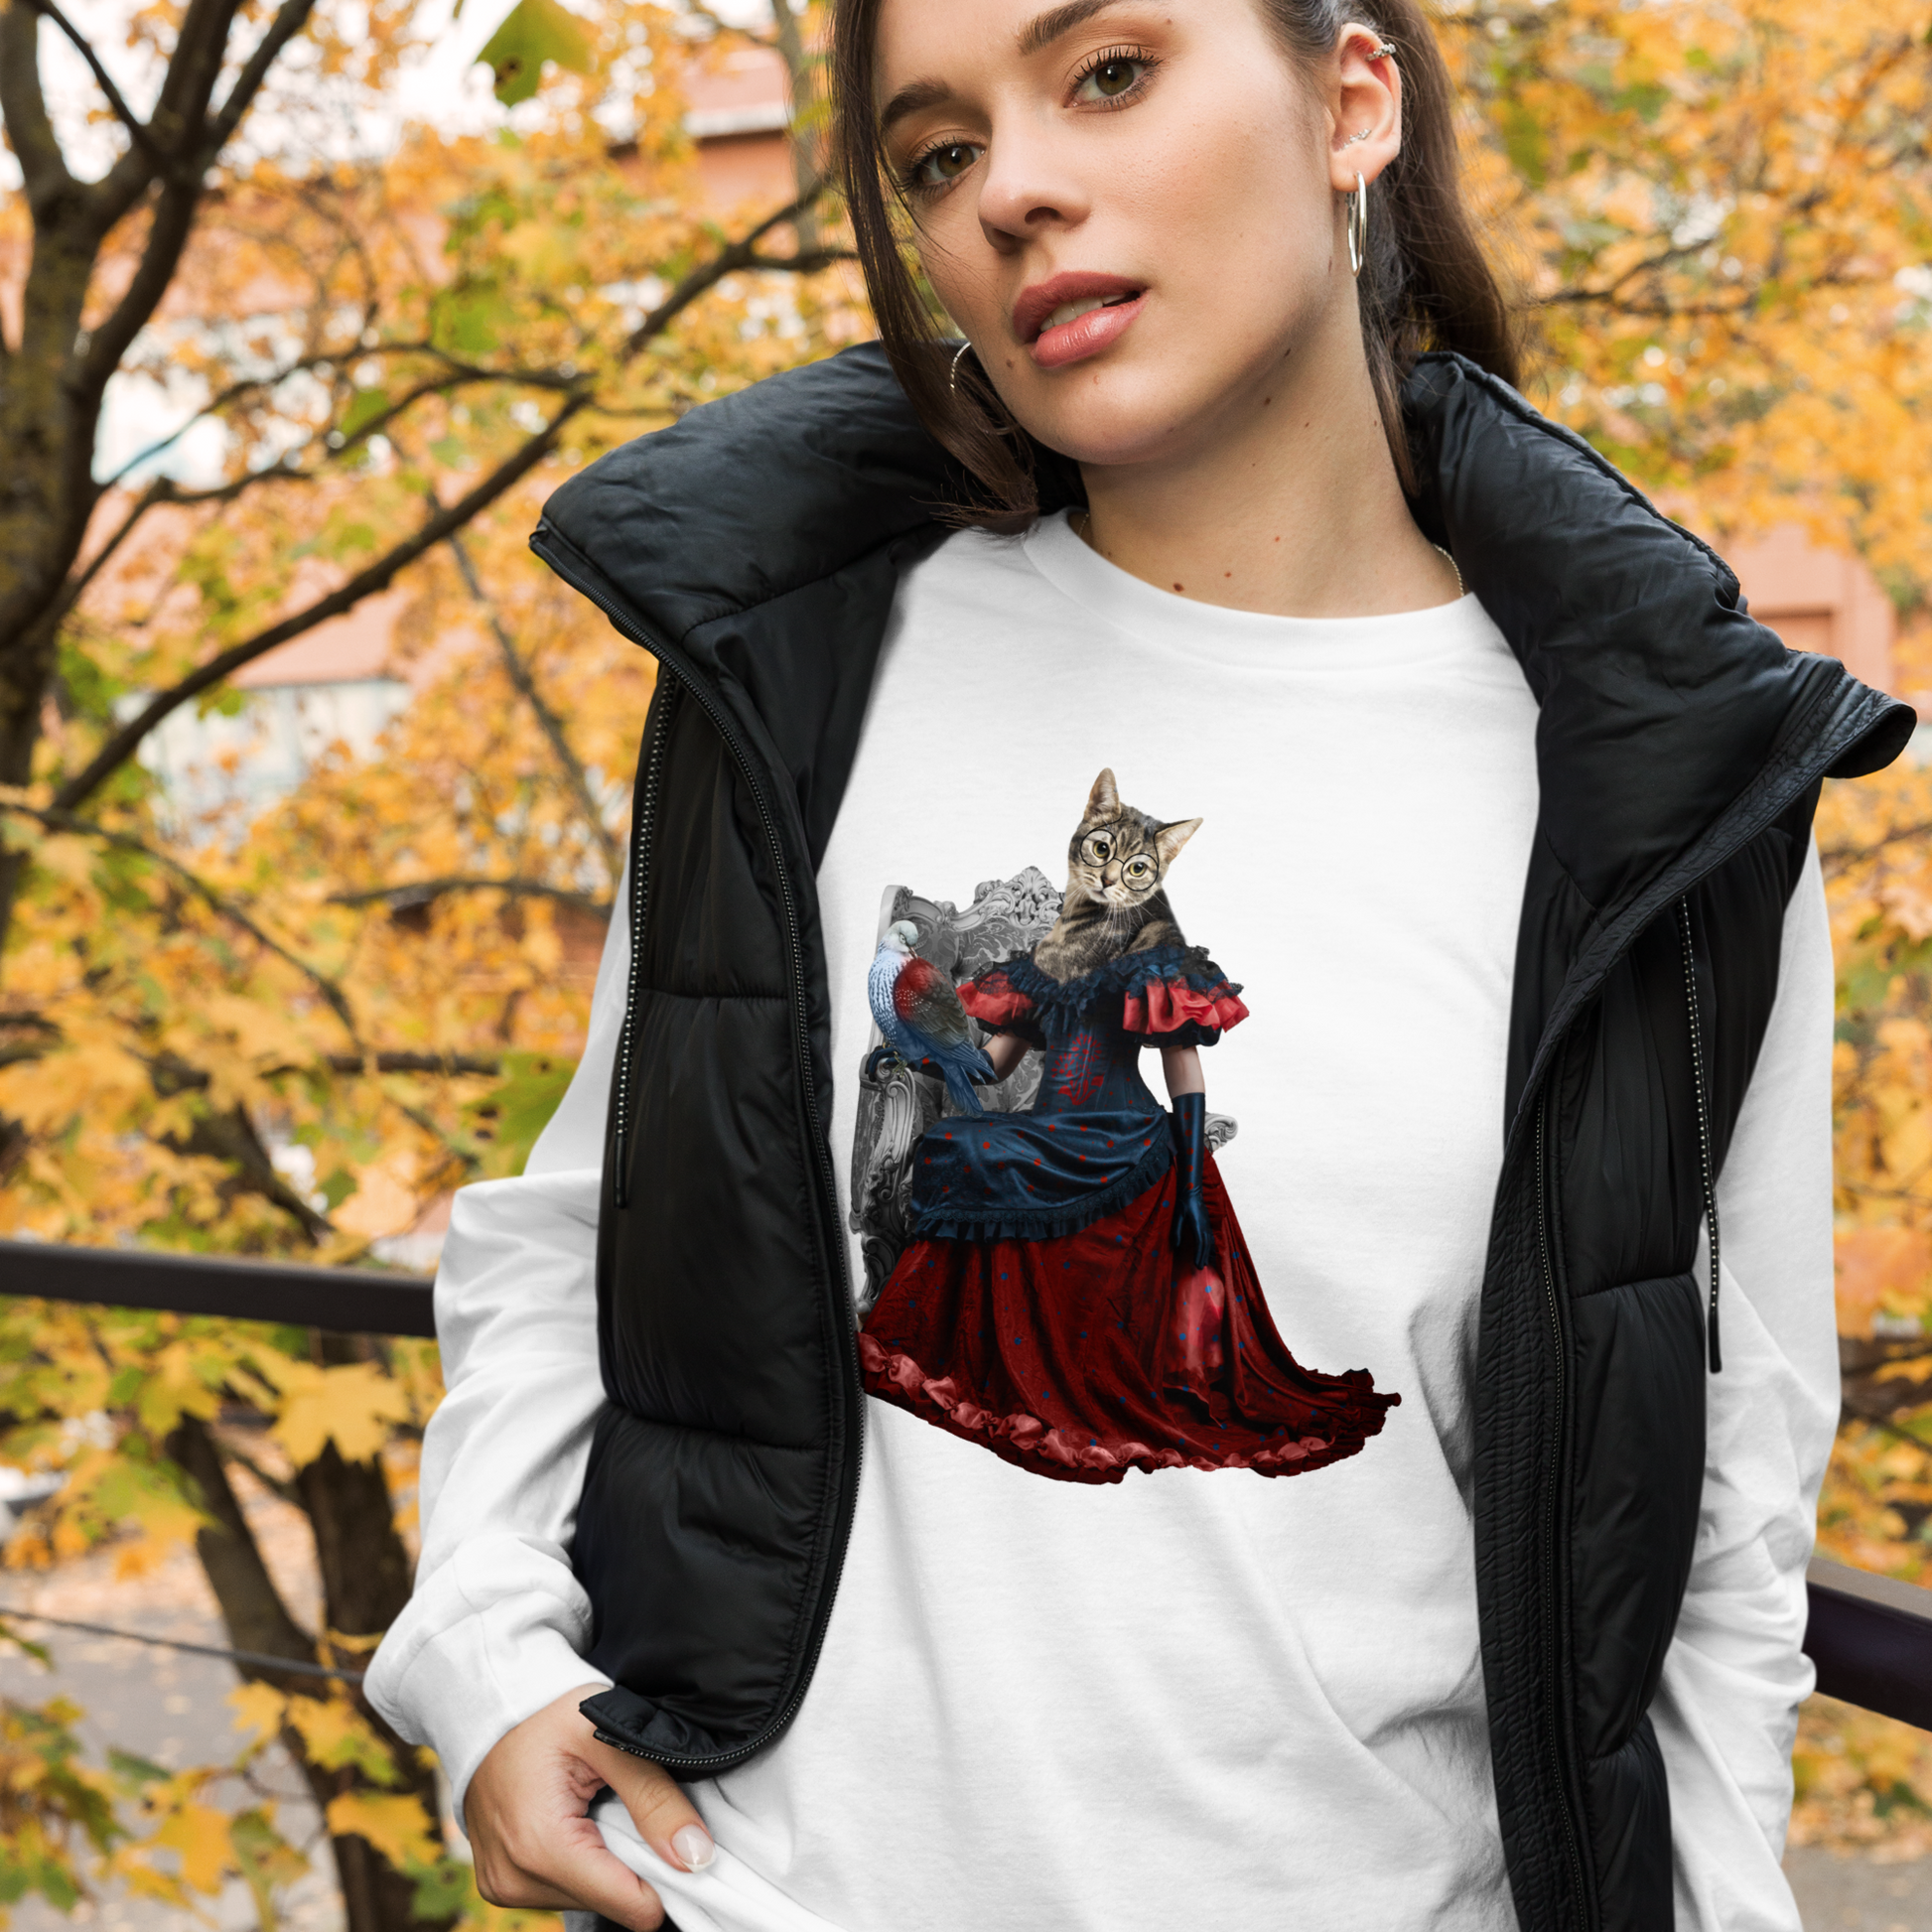 Woman Wearing a White Cat Long Sleeve Tee featuring an Anthropomorphic Cat graphic on the chest - Funny Cat Long Sleeve Graphic Tees - Boozy Fox